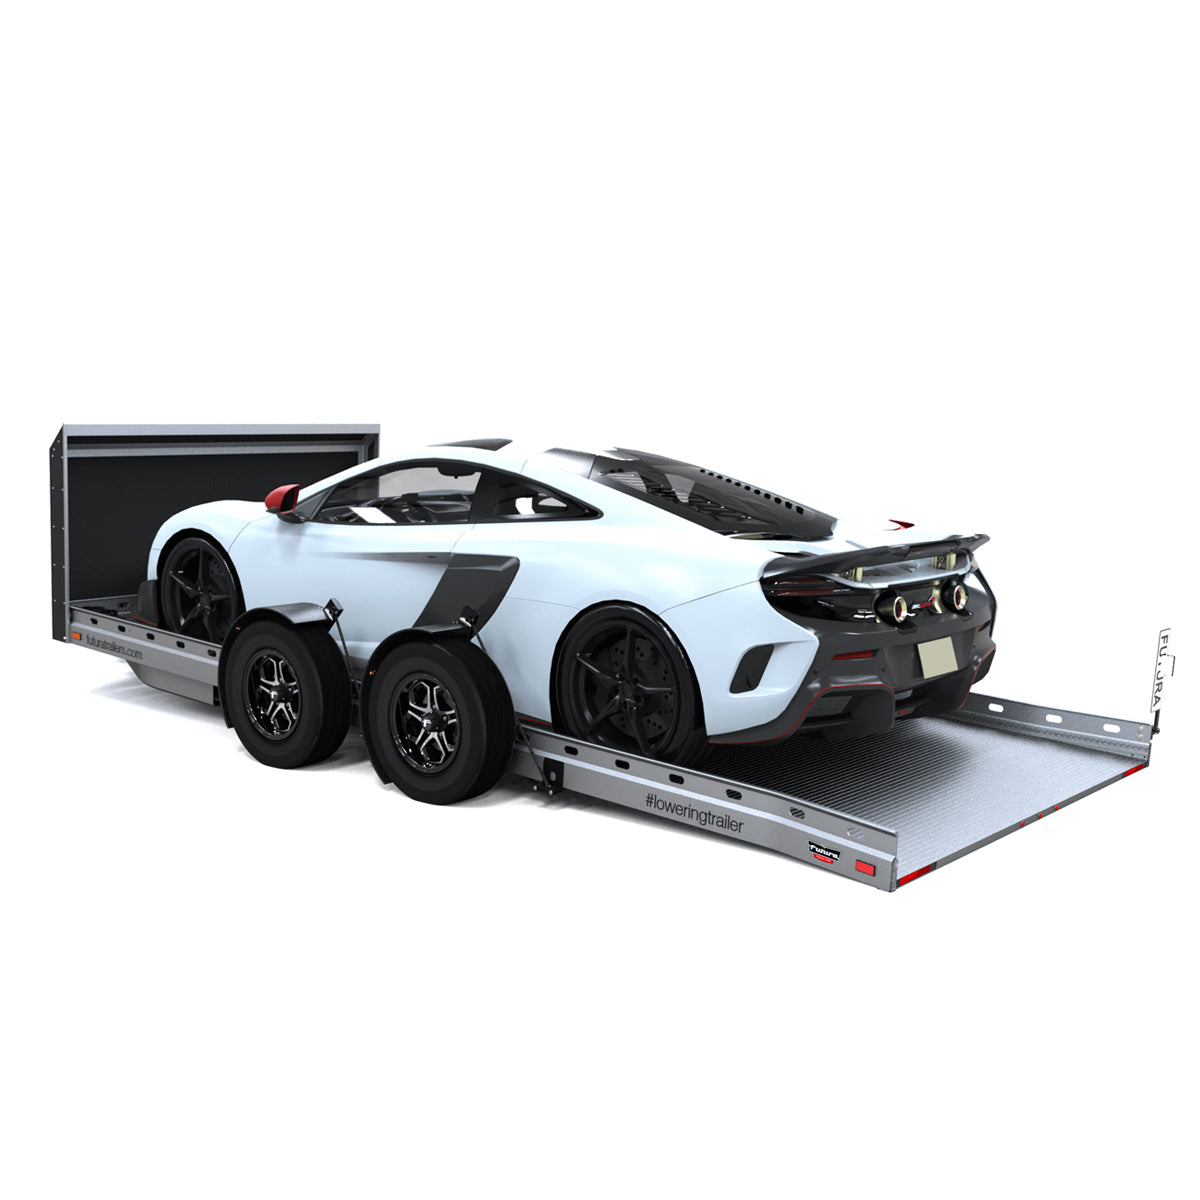 Super Sport Lowering Trailer from $22,995*